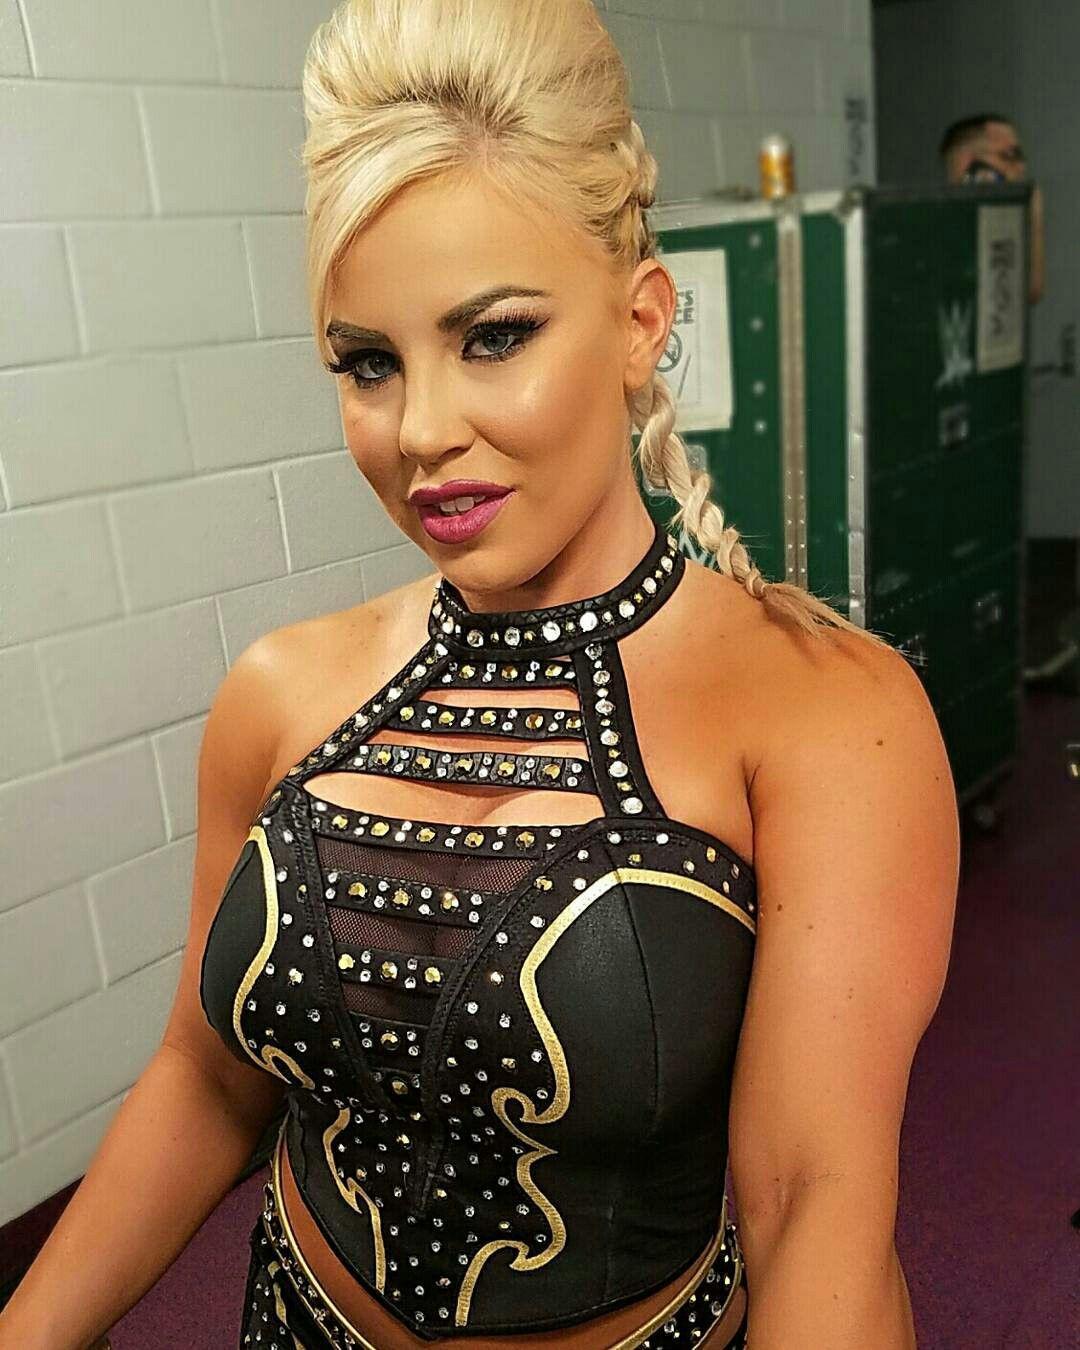 70+ Hot Pictures Of Dana Brooke Show Off This WWE Diva’s Sexy Body 5